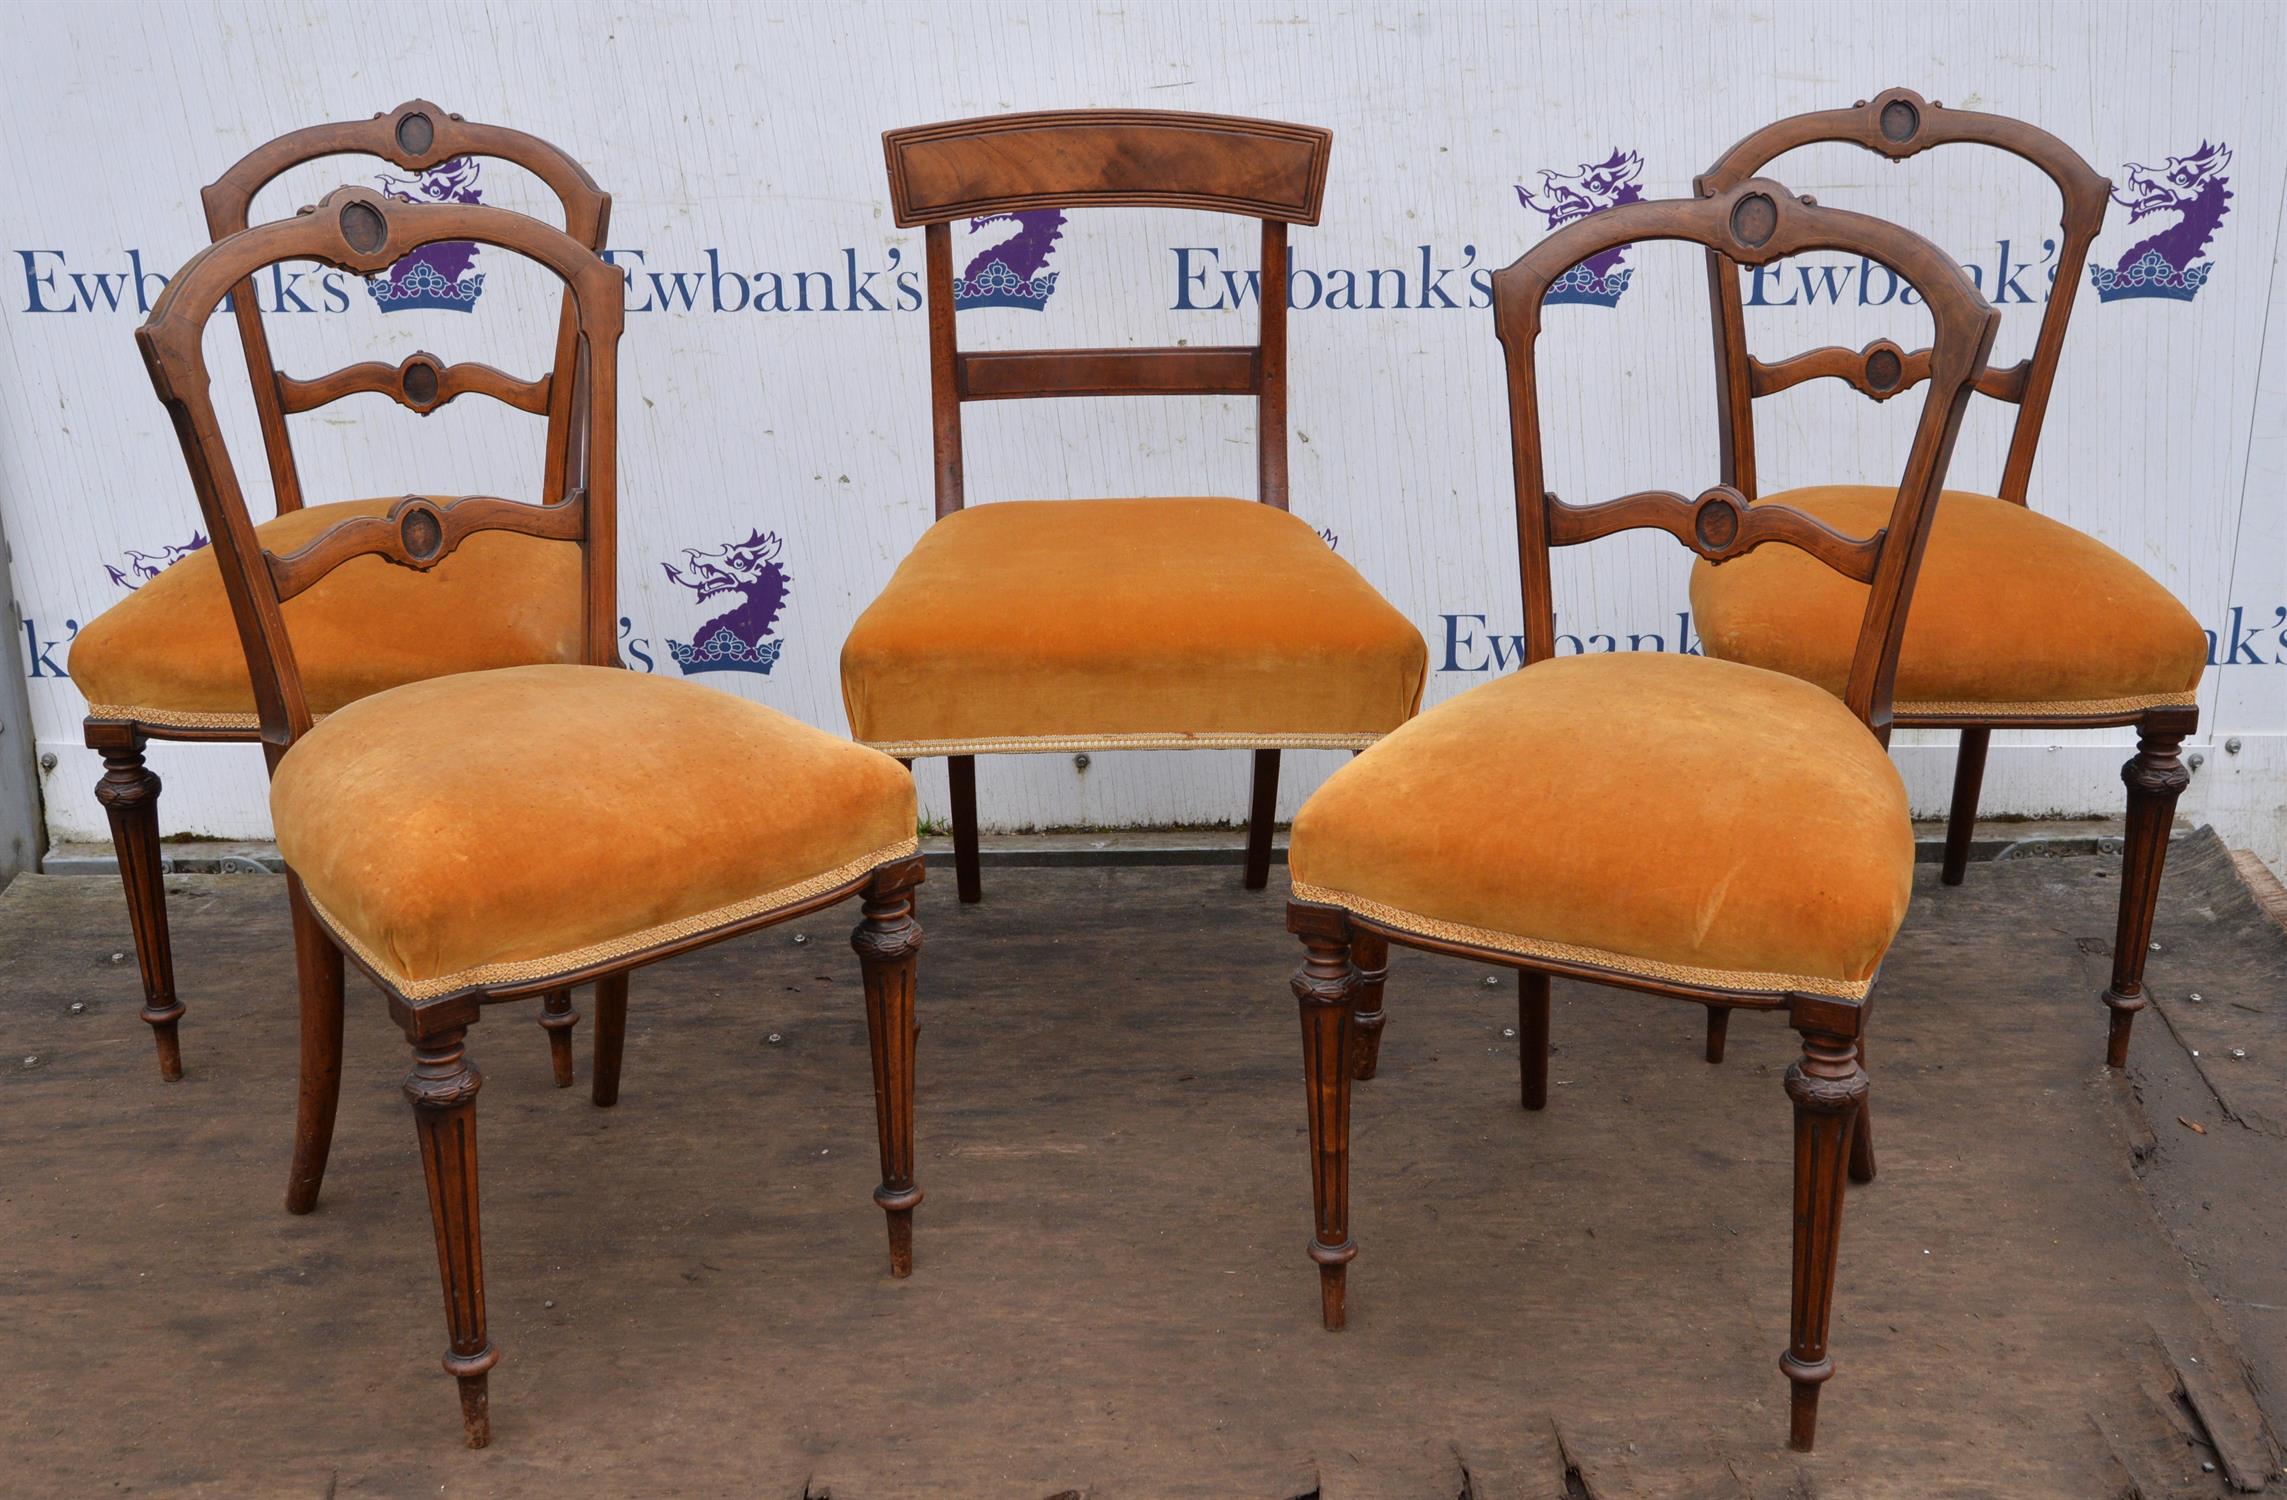 A set of four late Victorian rosewood salon chairs, inlaid with stringing, on fluted legs,